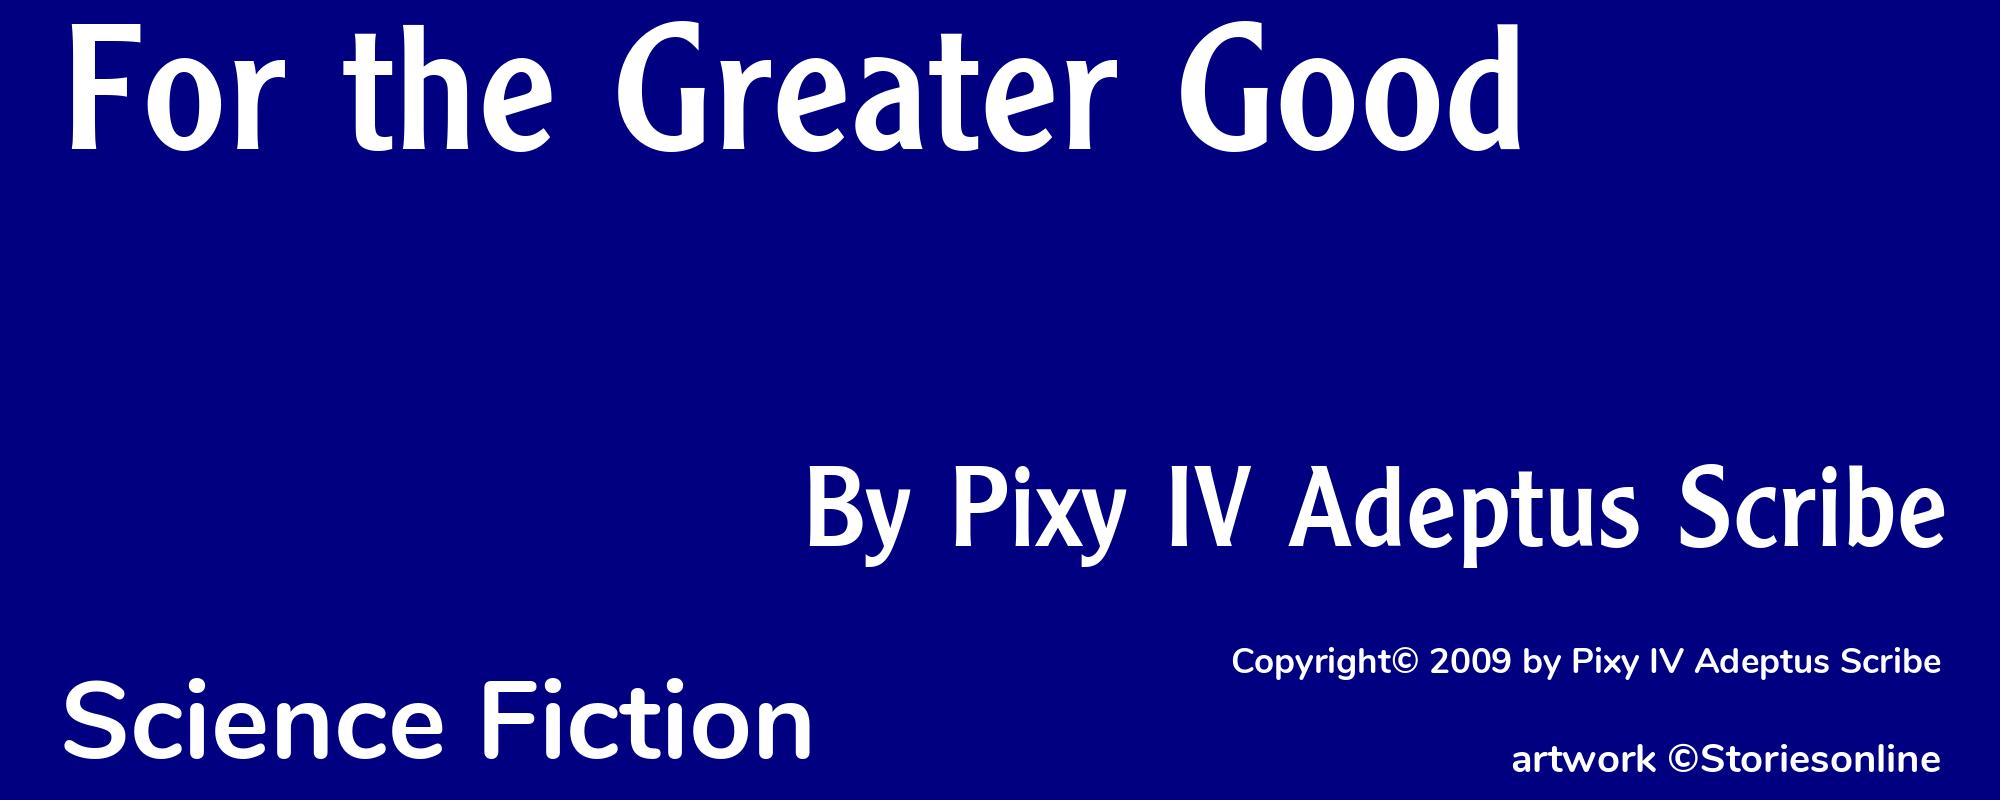 For the Greater Good - Cover